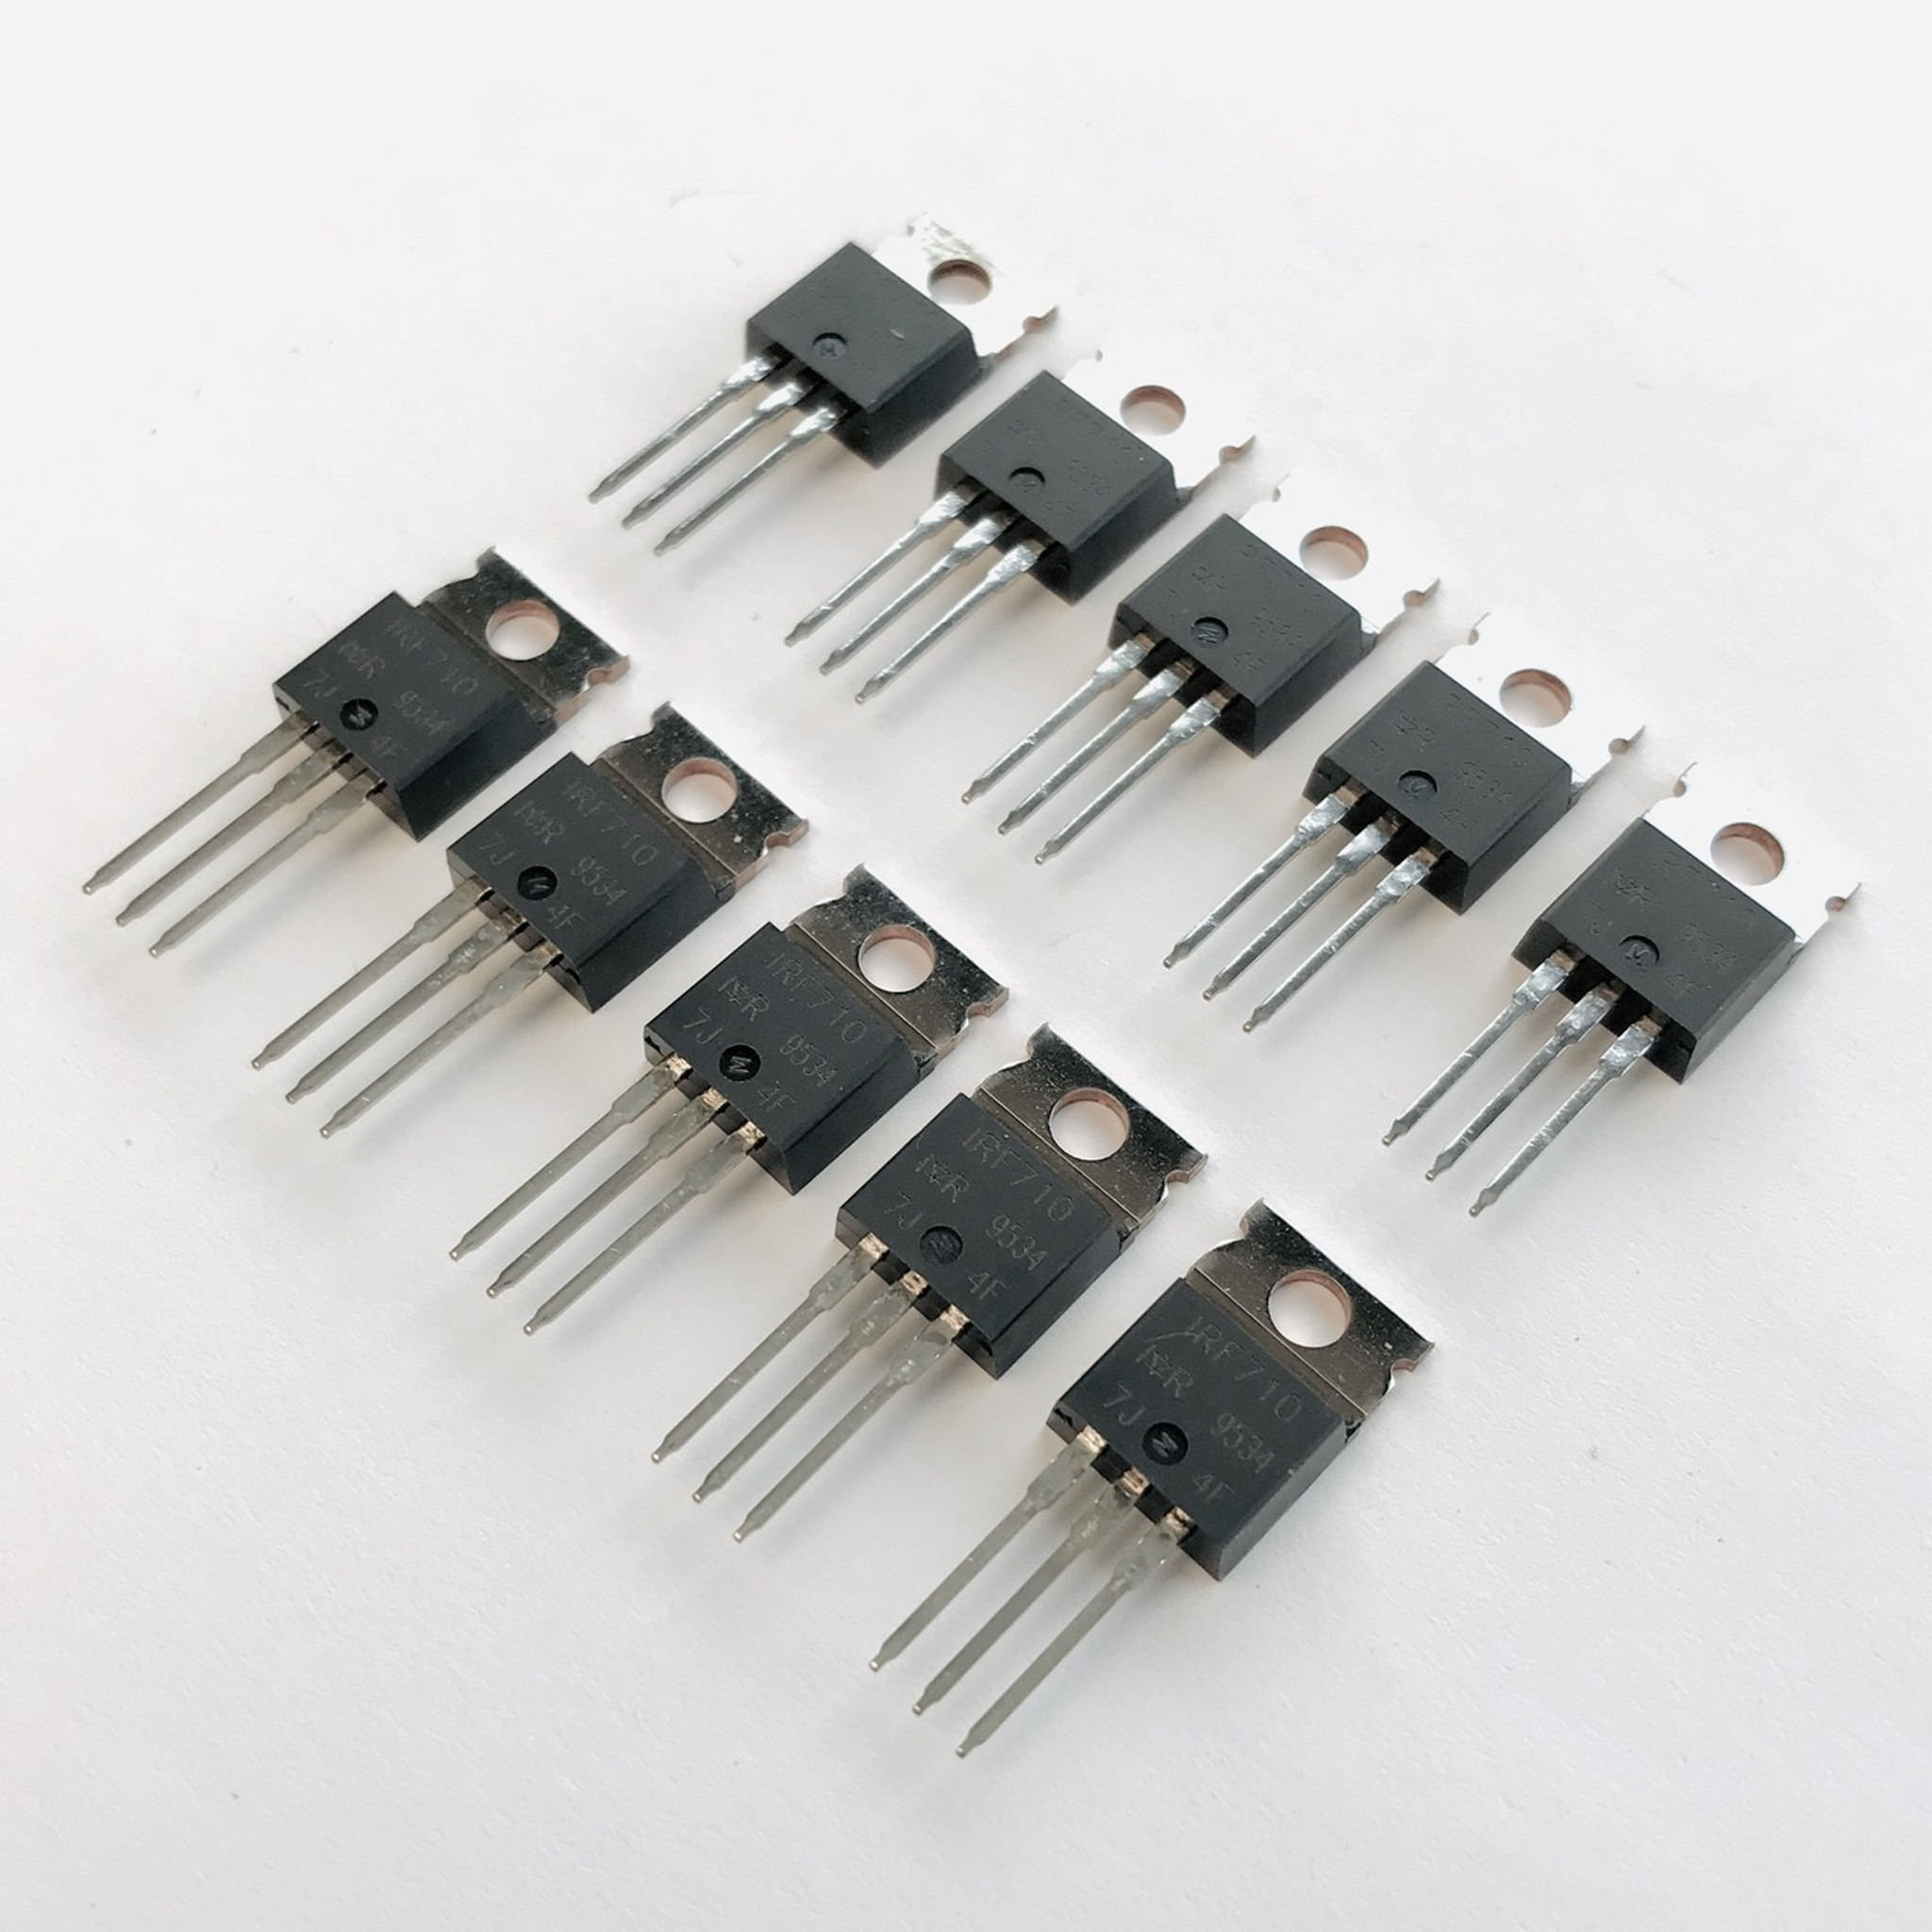 IXFP7N100P MOSFET 7 Amps 1000V Pack of 10 